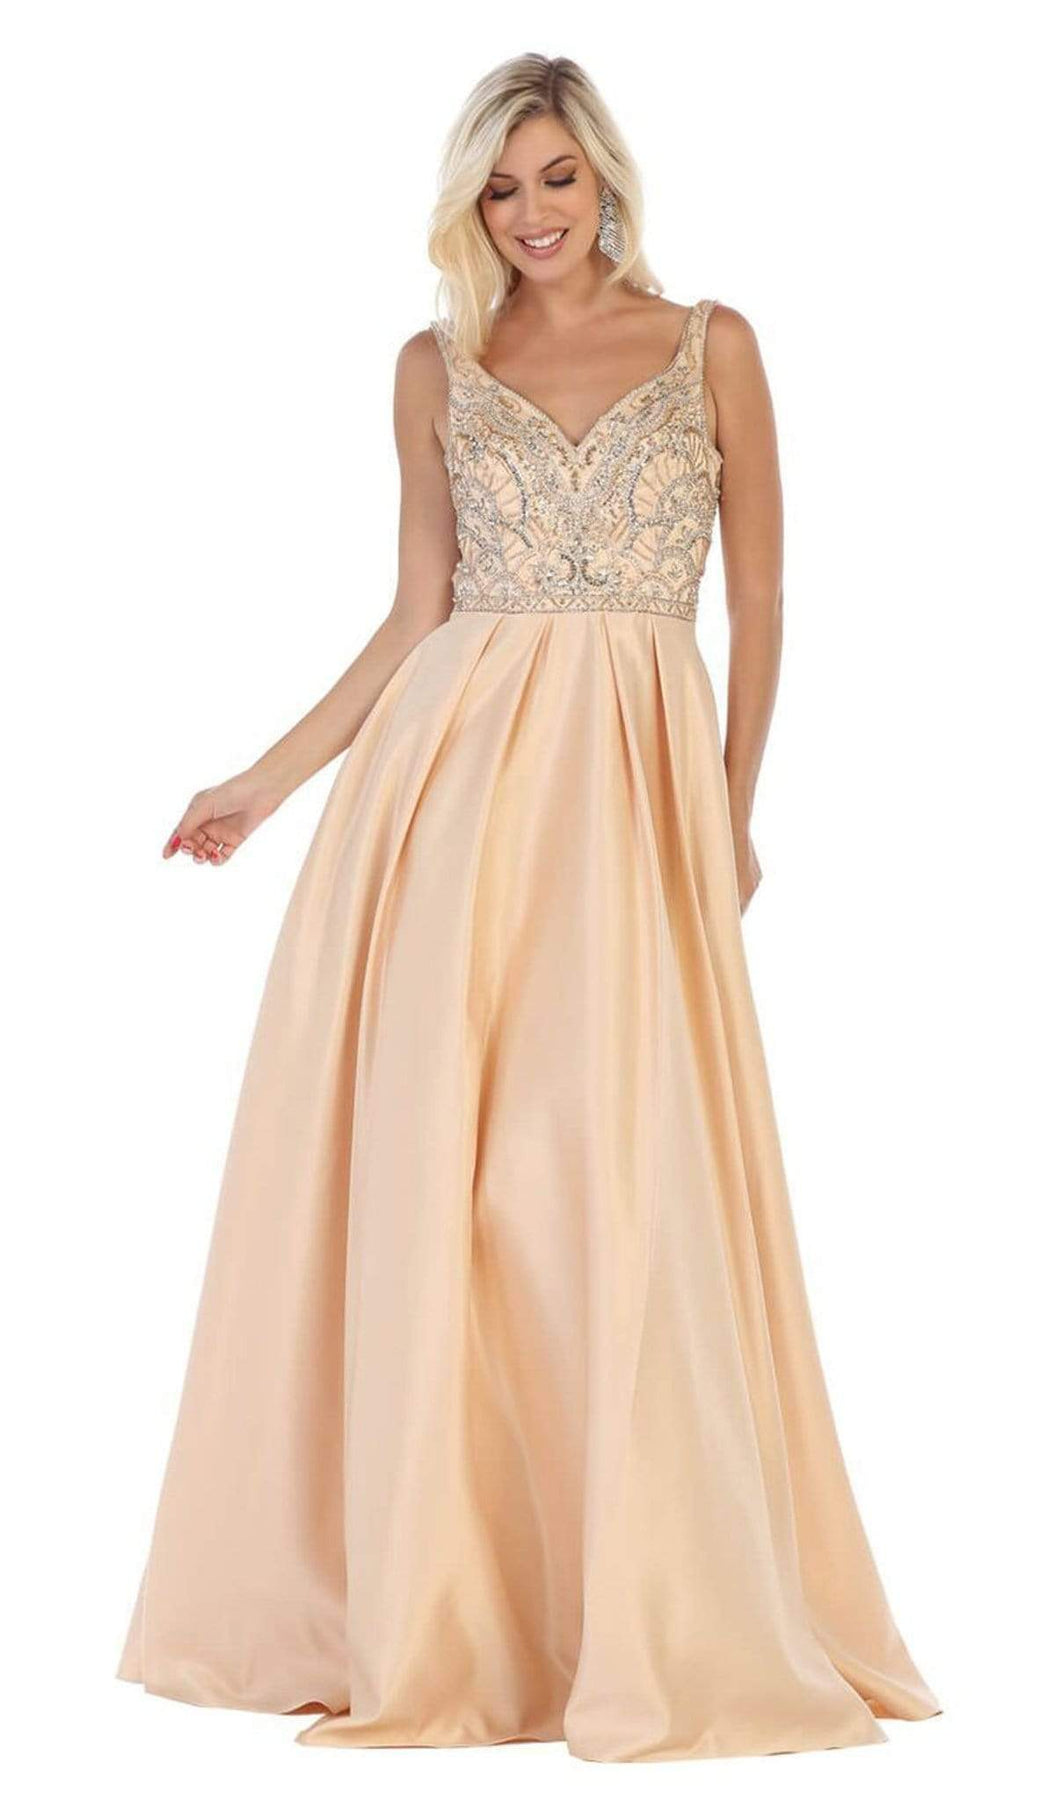 May Queen - MQ1632 Beaded V-Neck Pleated Ballgown Bridesmaid Dresses 4 / Champagne